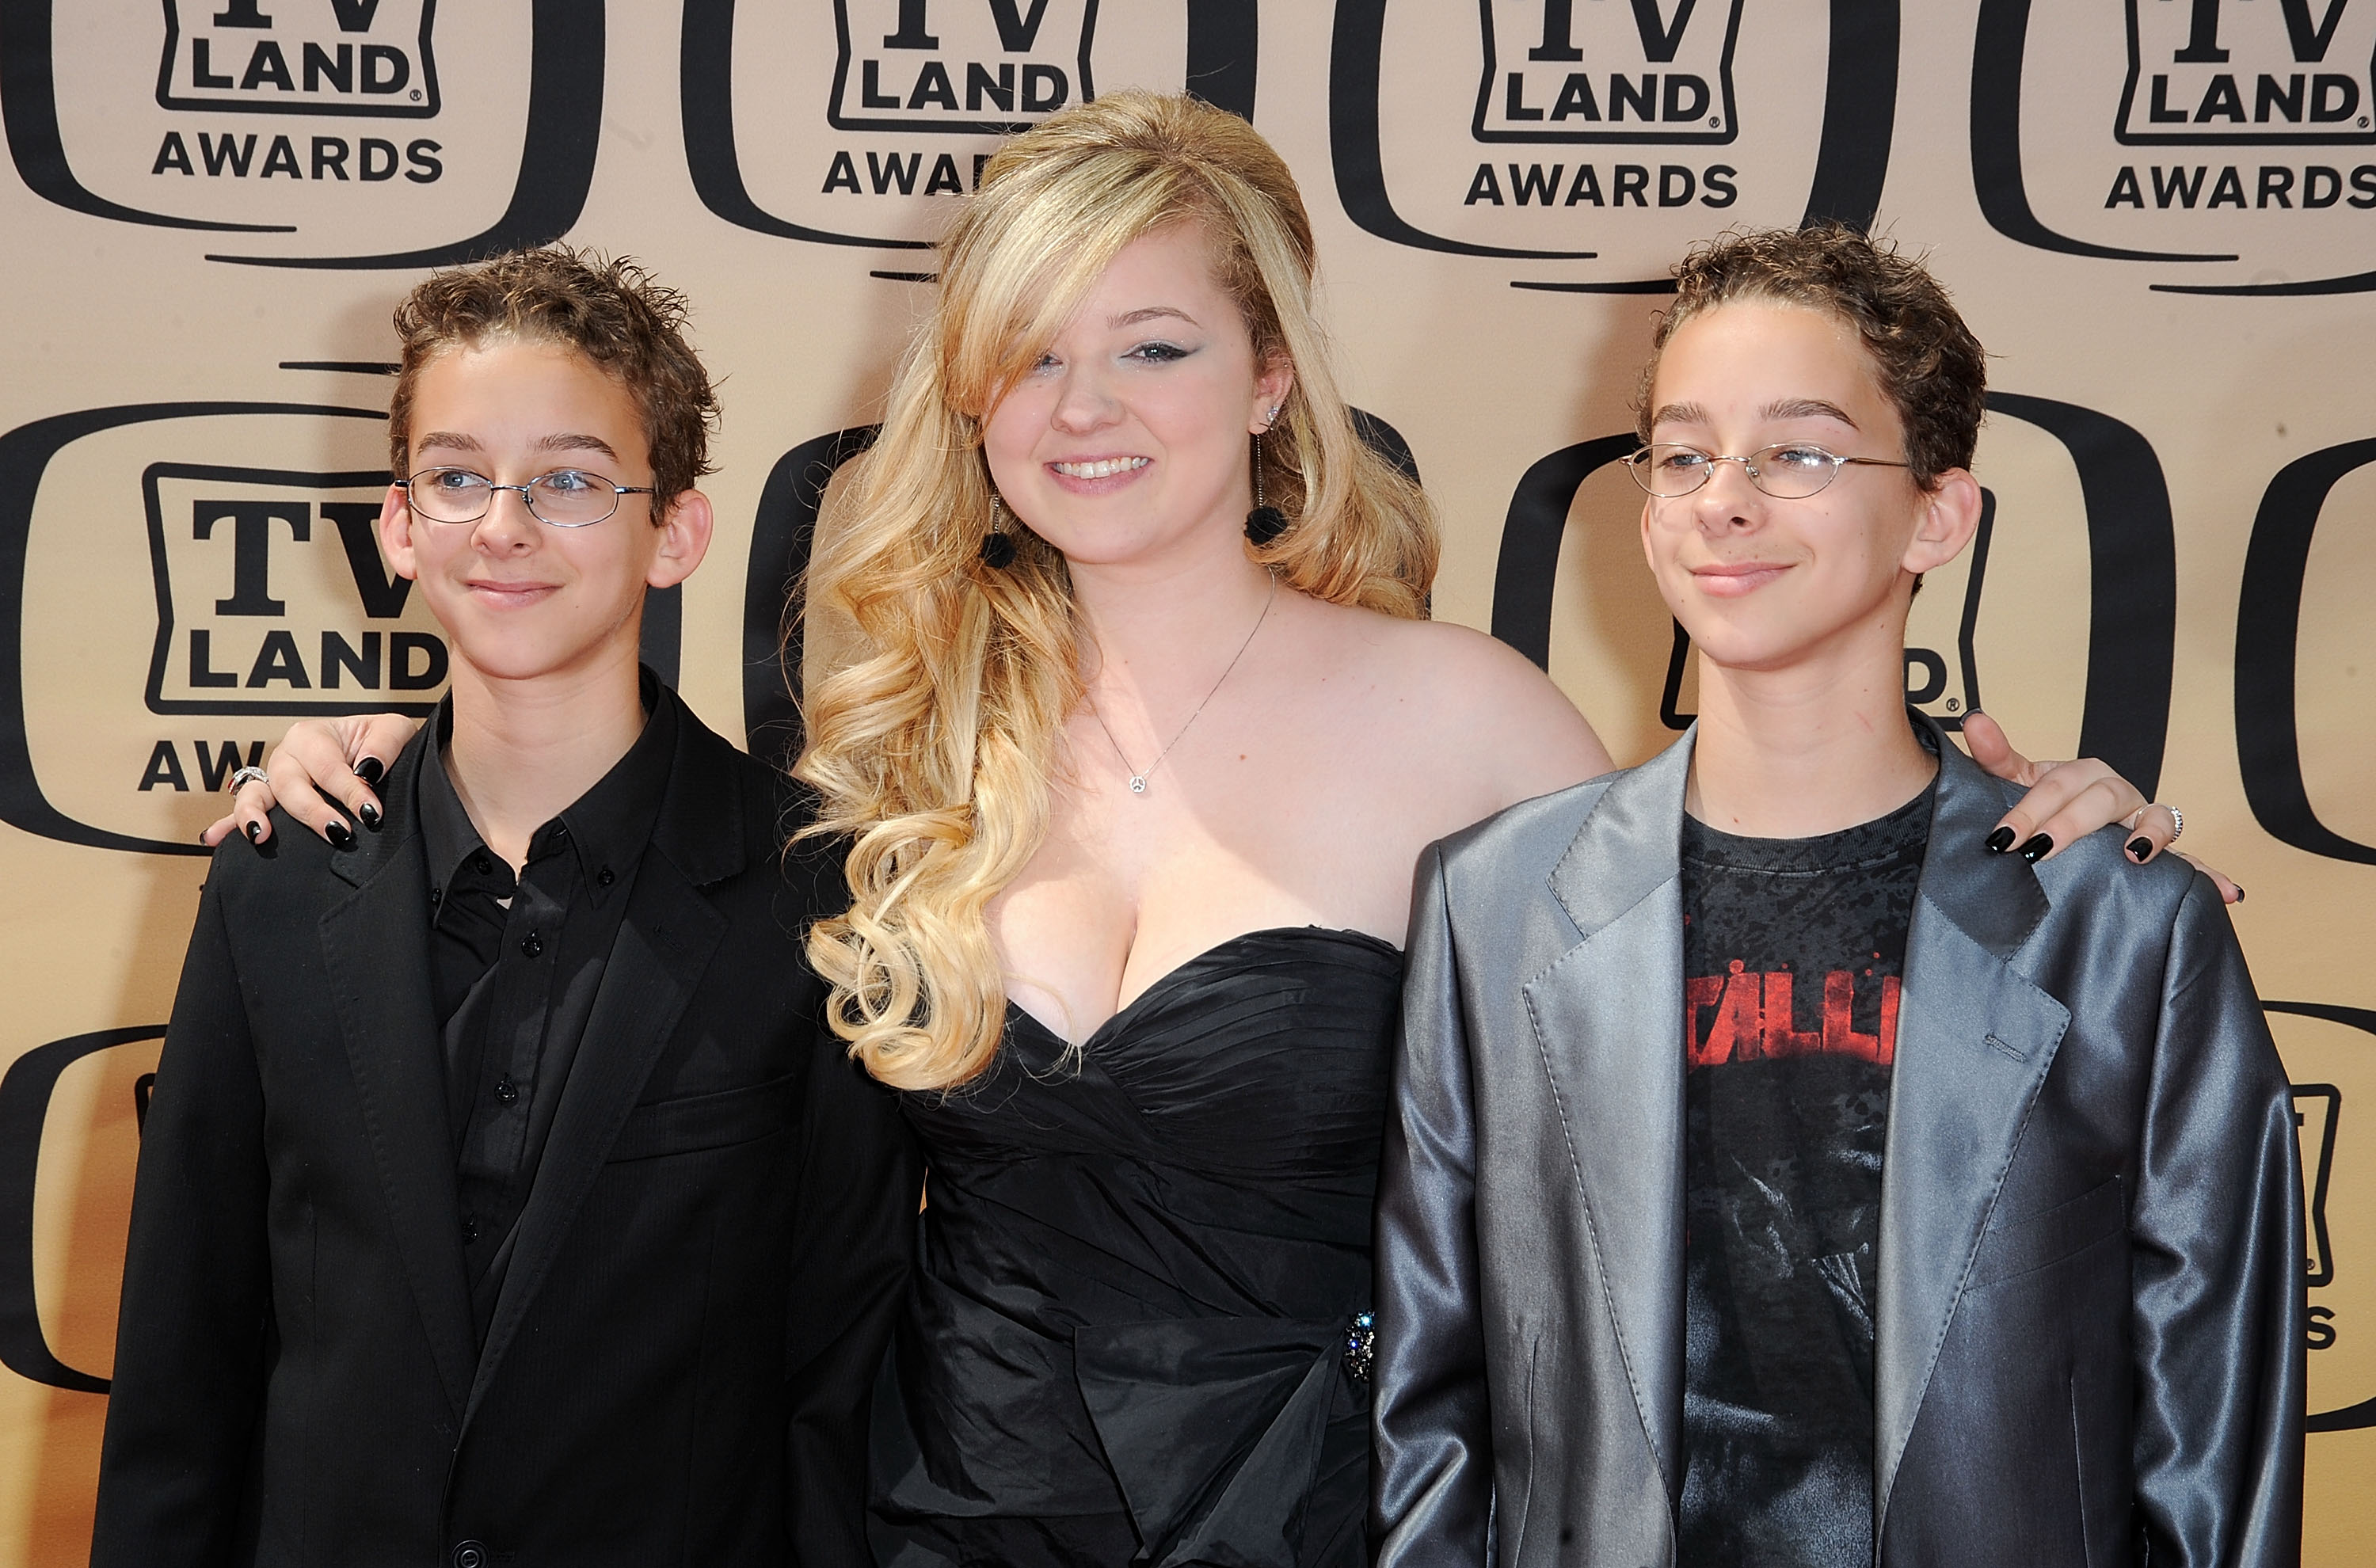 Actors Sawyer Sweeten, Madylin Sweeten and Sullivan Sweeten attend the 8th Annual TV Land Awards held at Sony Studios on April 17, 2010 in Culver City, California. | Source: Getty Images